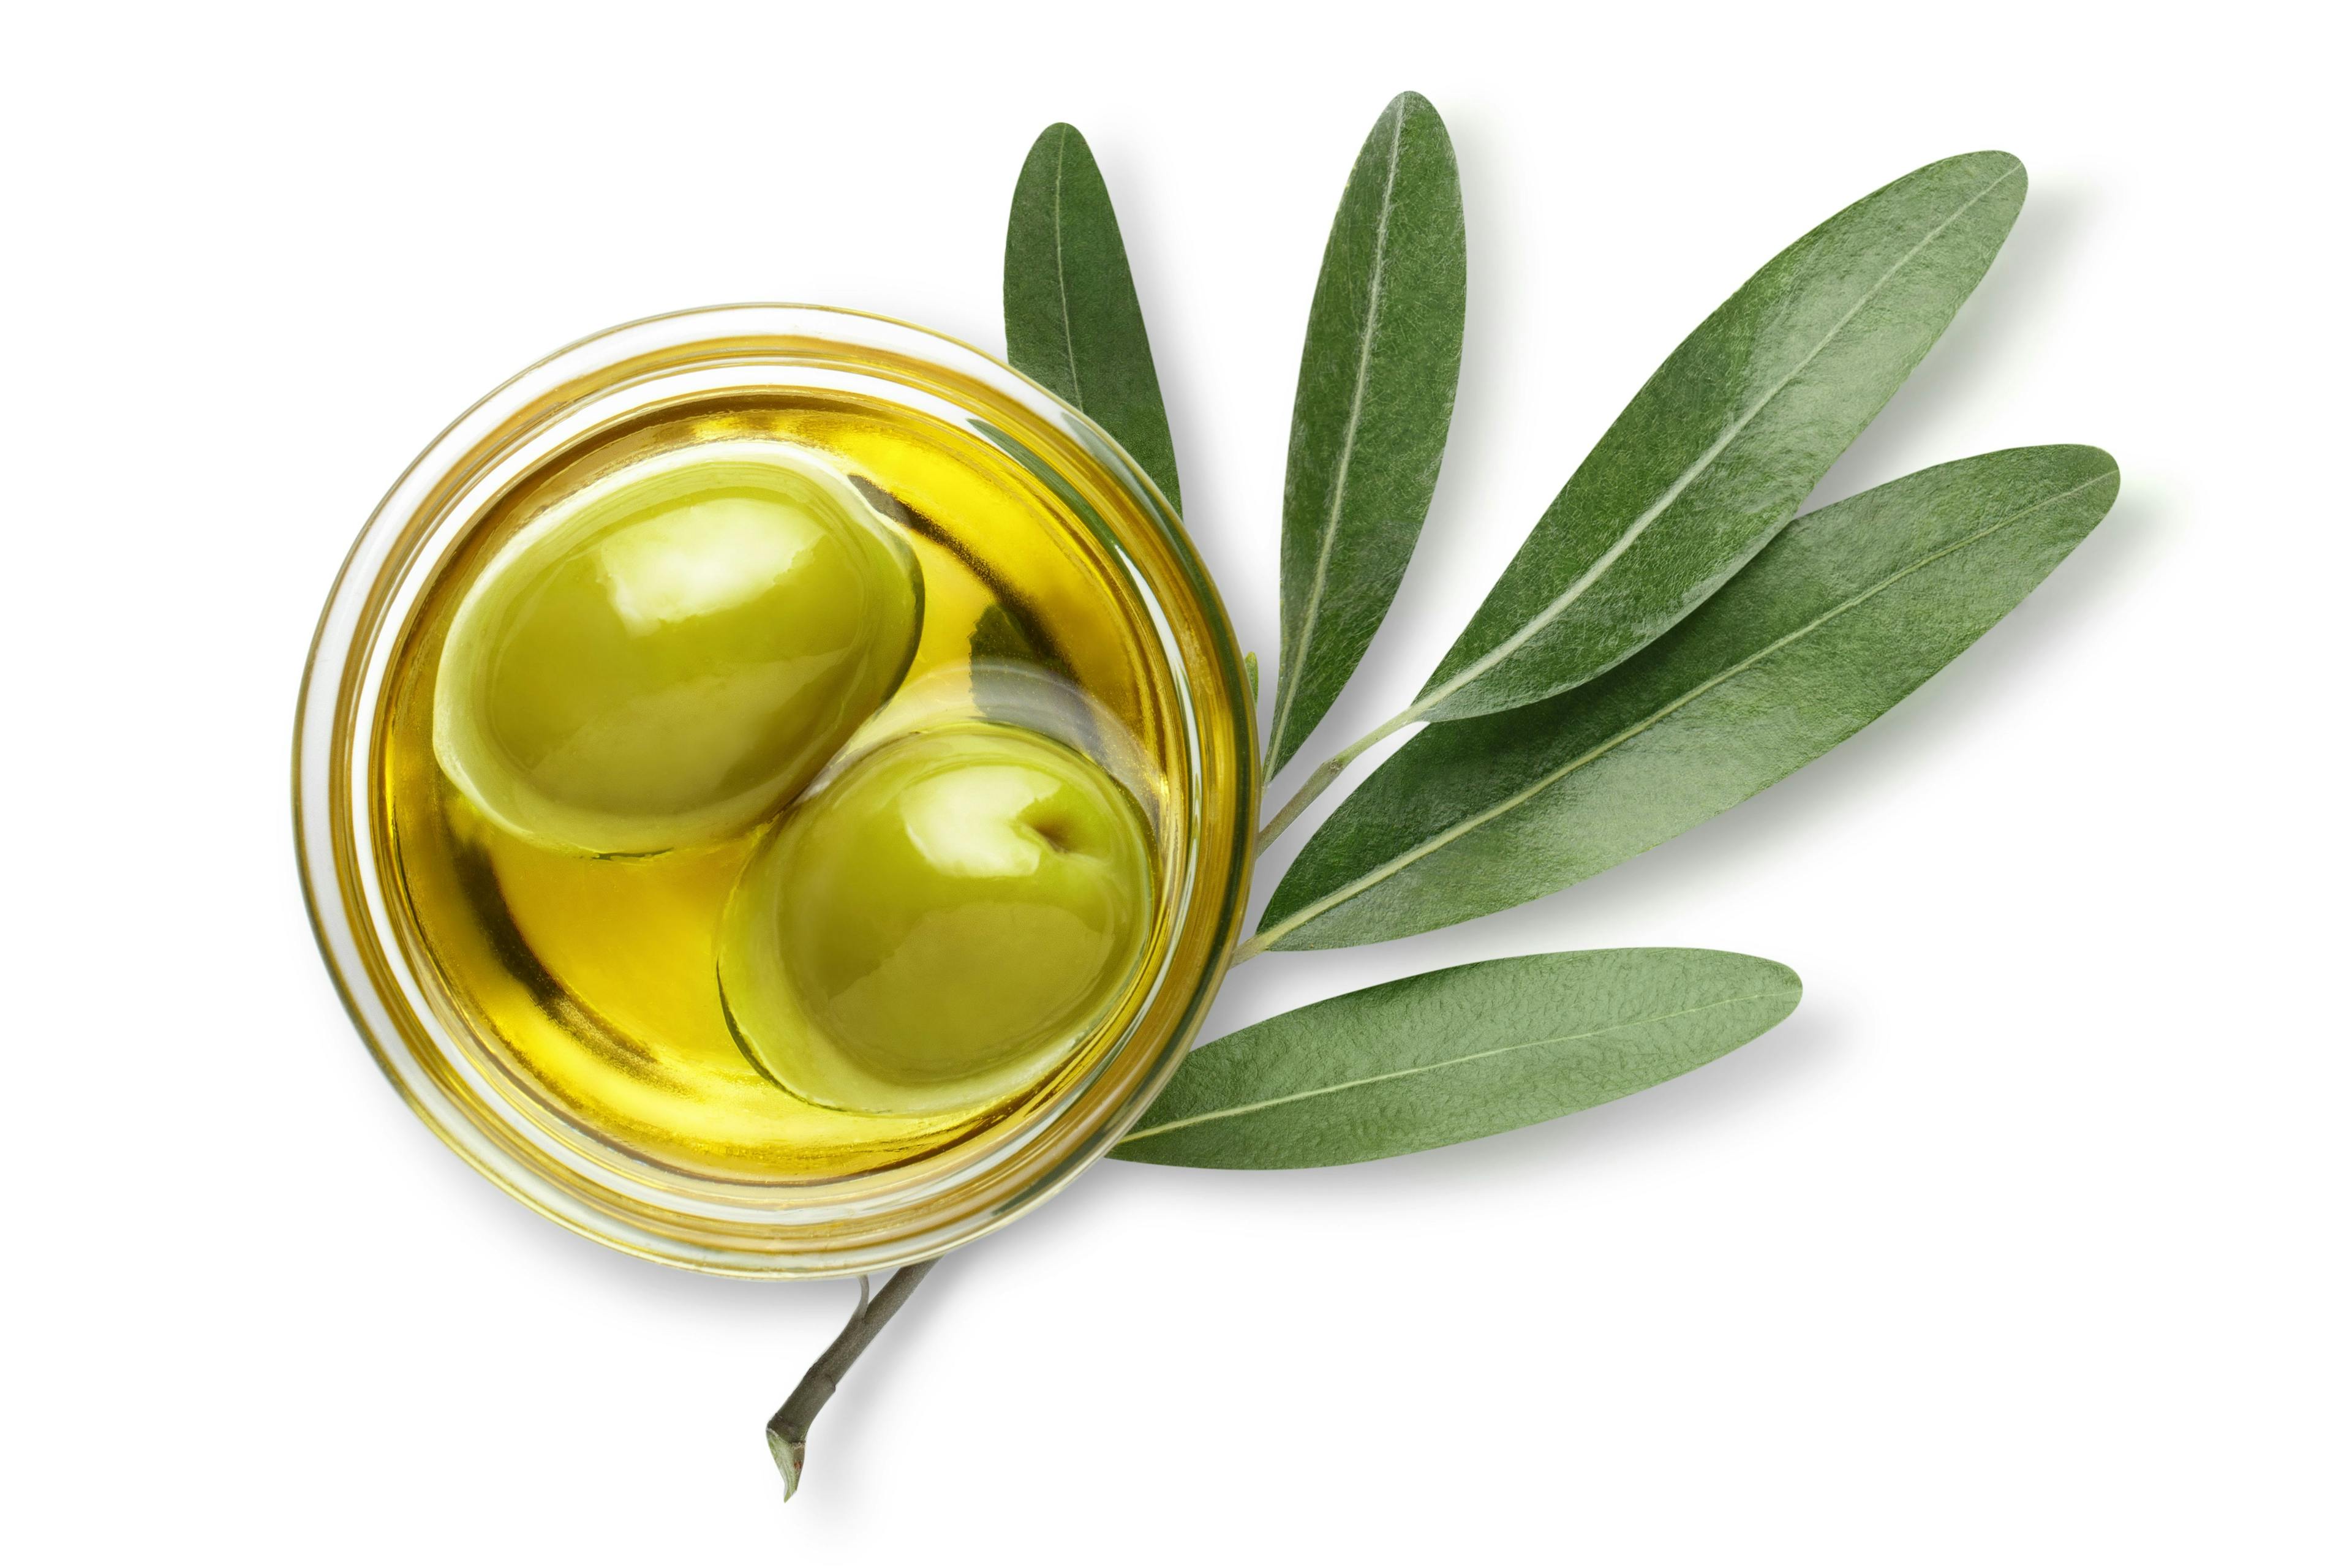 QUIZ: What Properties of Olive Oil Make It Useful For Dermatological Treatments?